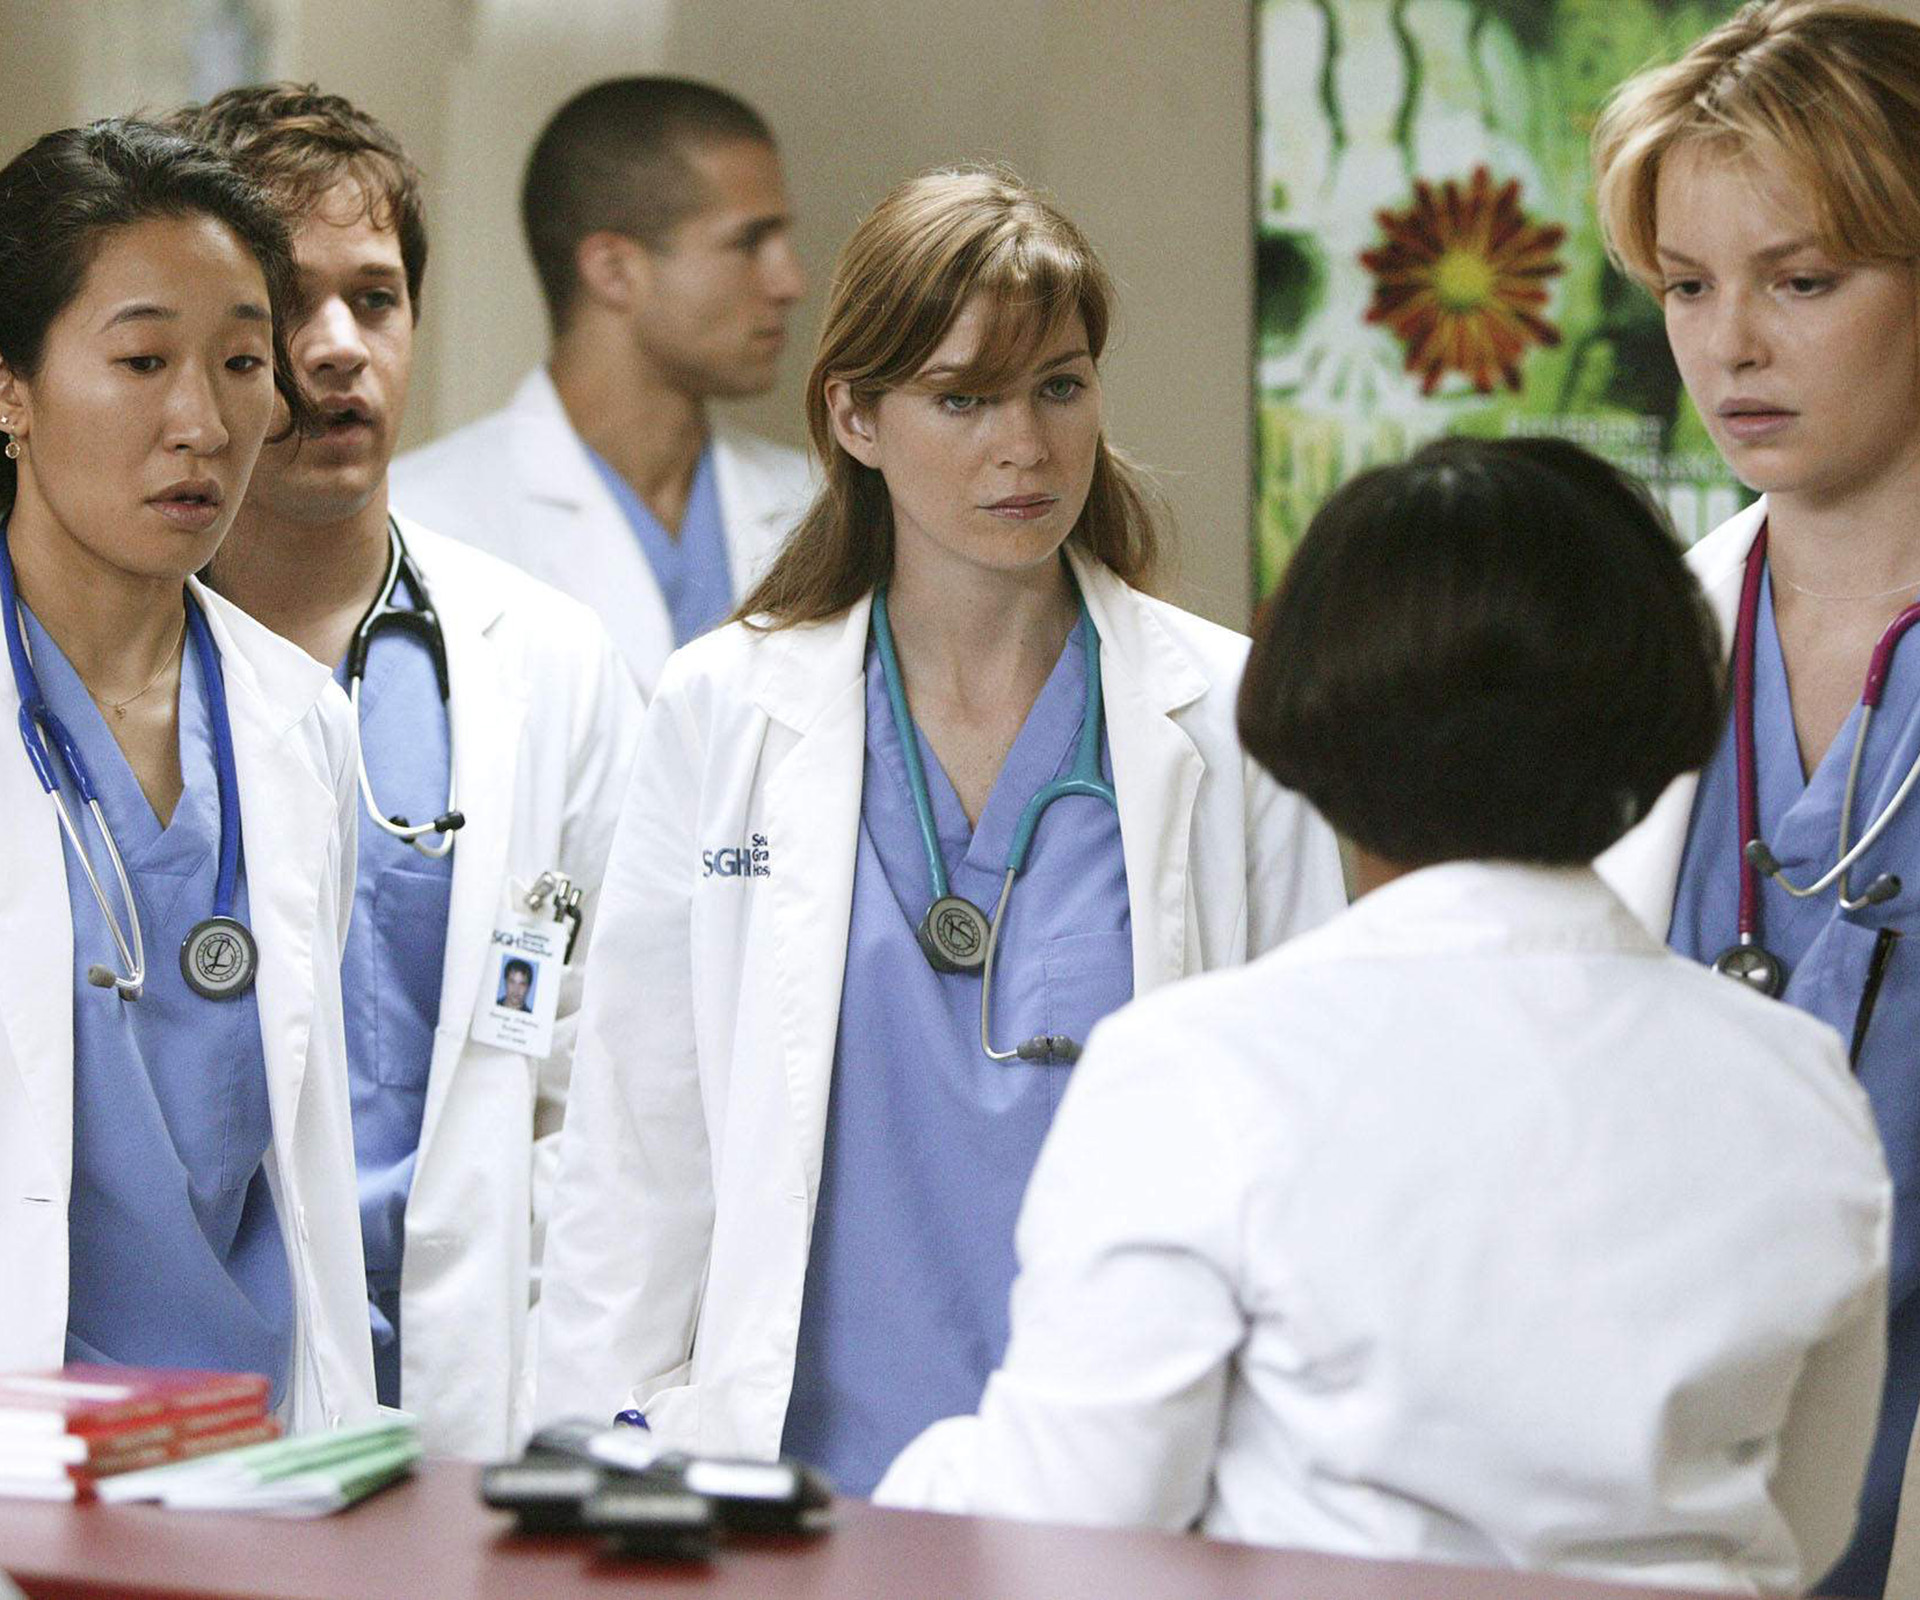 Spoiler Alert: A major character from Grey’s Anatomy has died